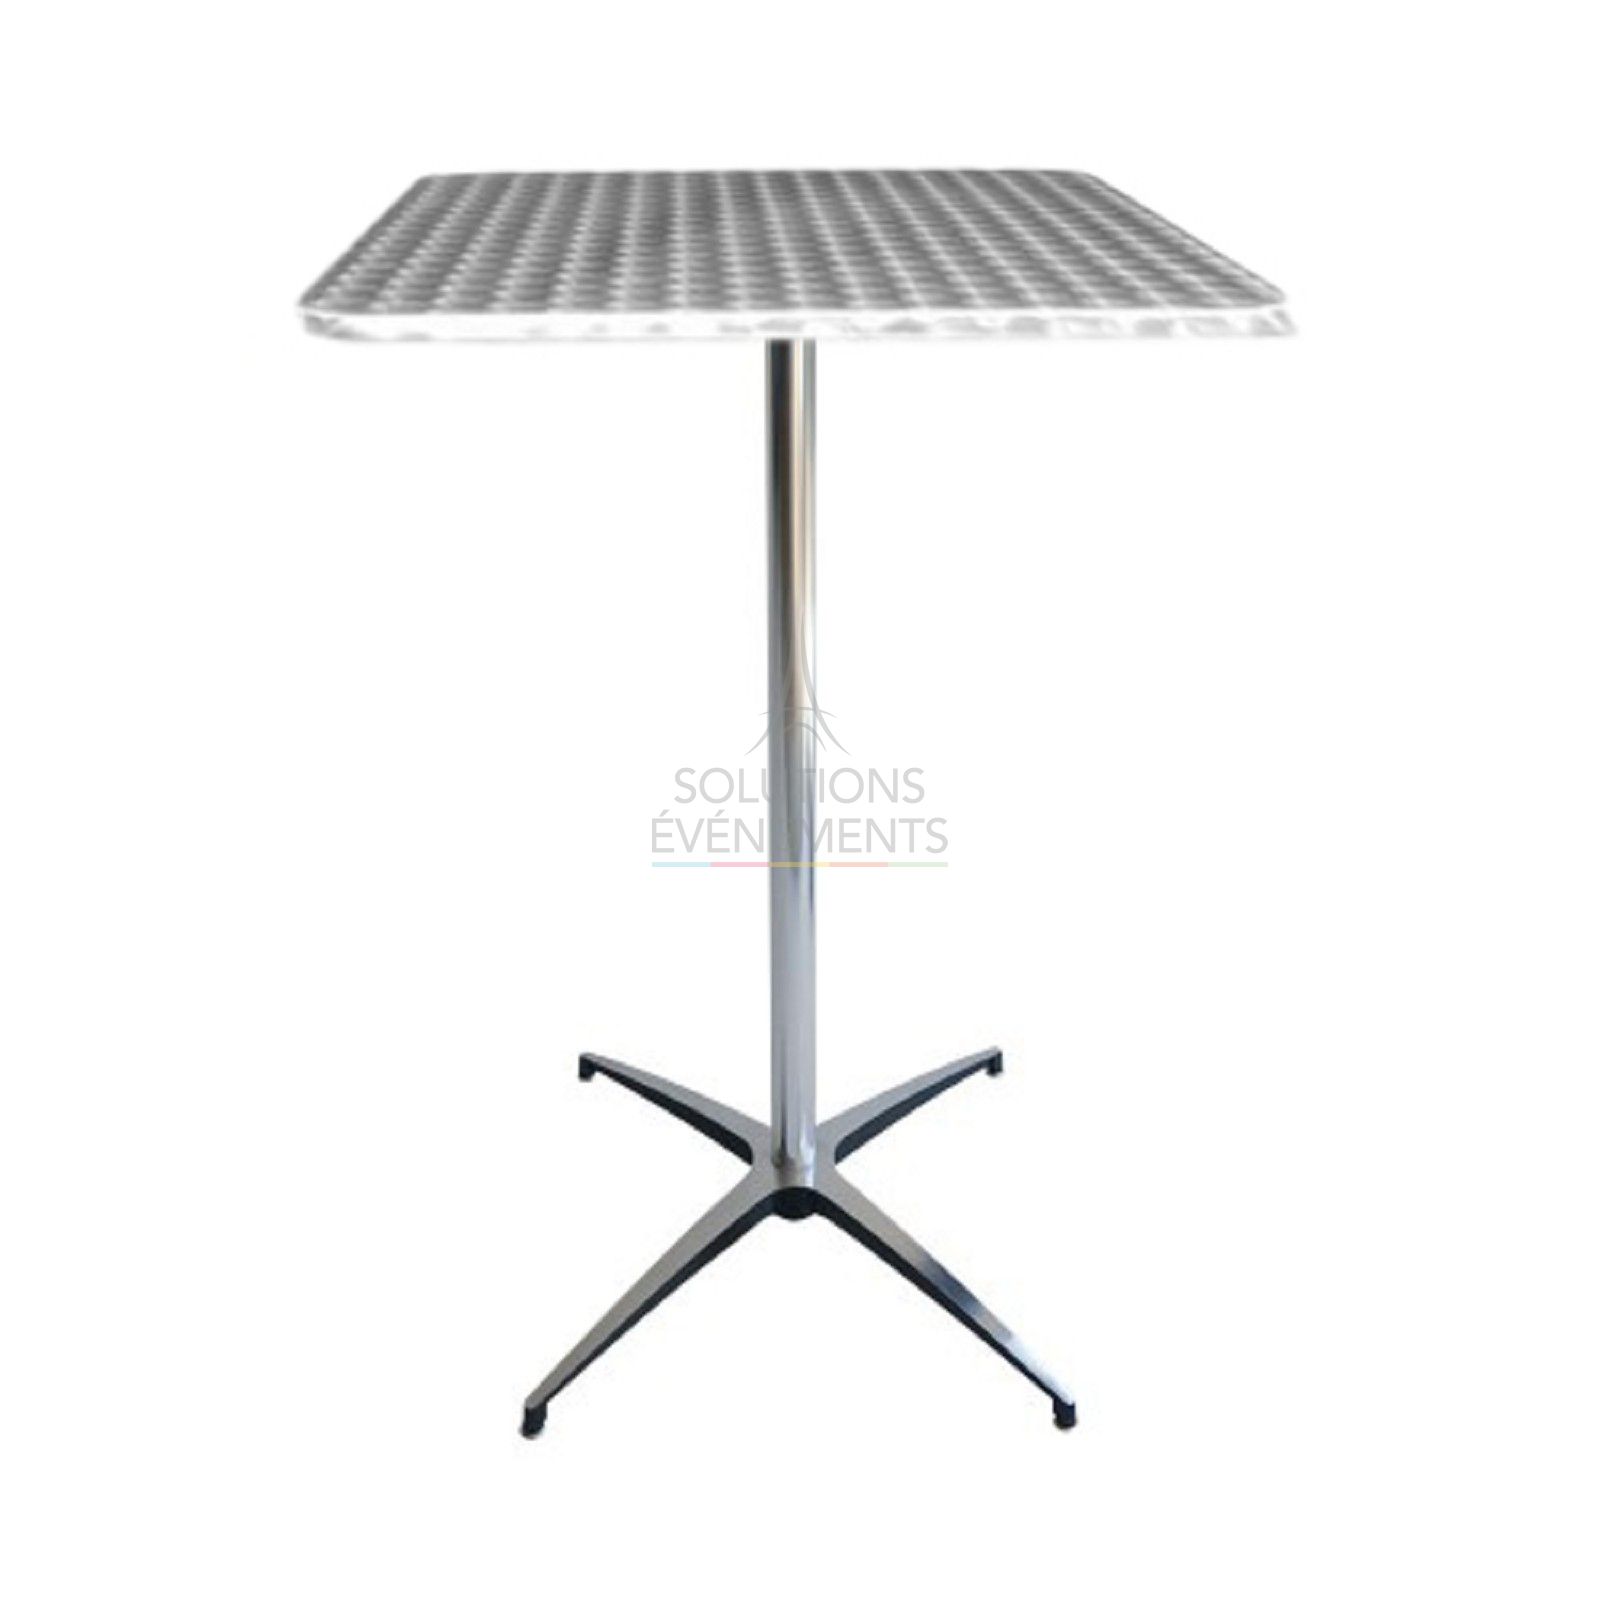 Rental of high standing bistro table 70cm in square shape